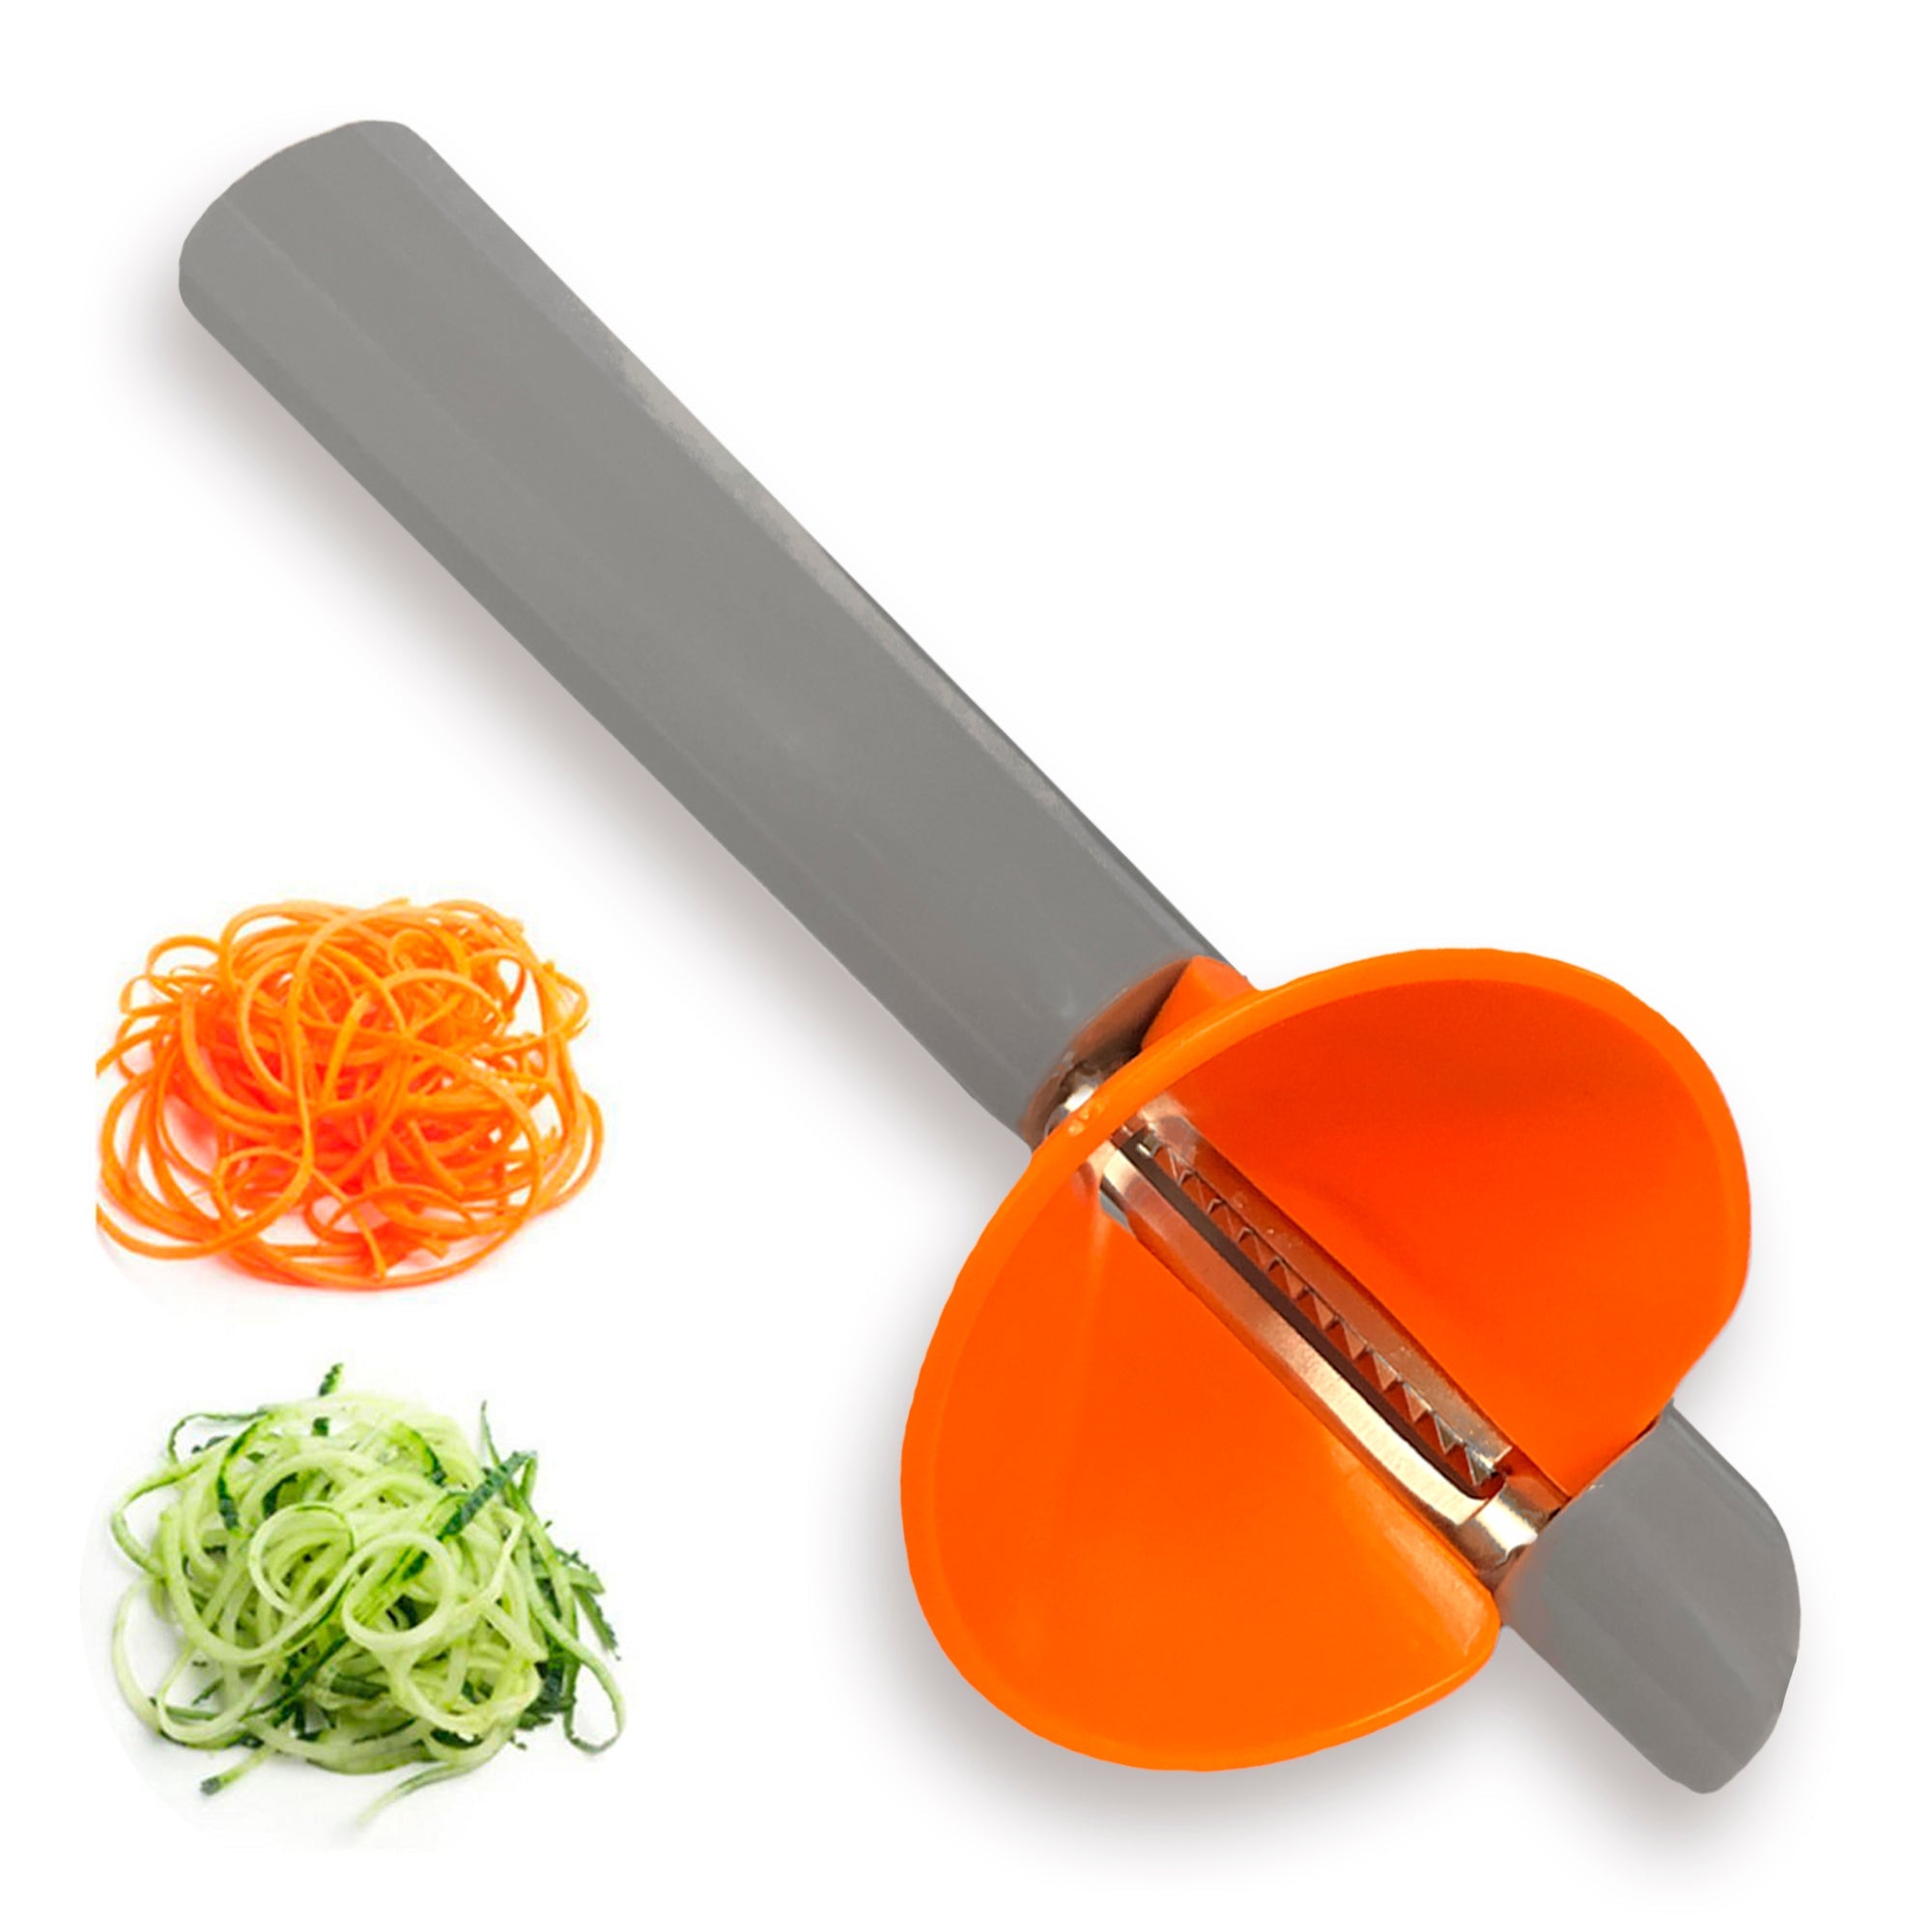 https://cdn.shopify.com/s/files/1/2091/6511/products/cheer-collection-vegetable-peeler-and-spiralizer-285948.jpg?v=1671777057